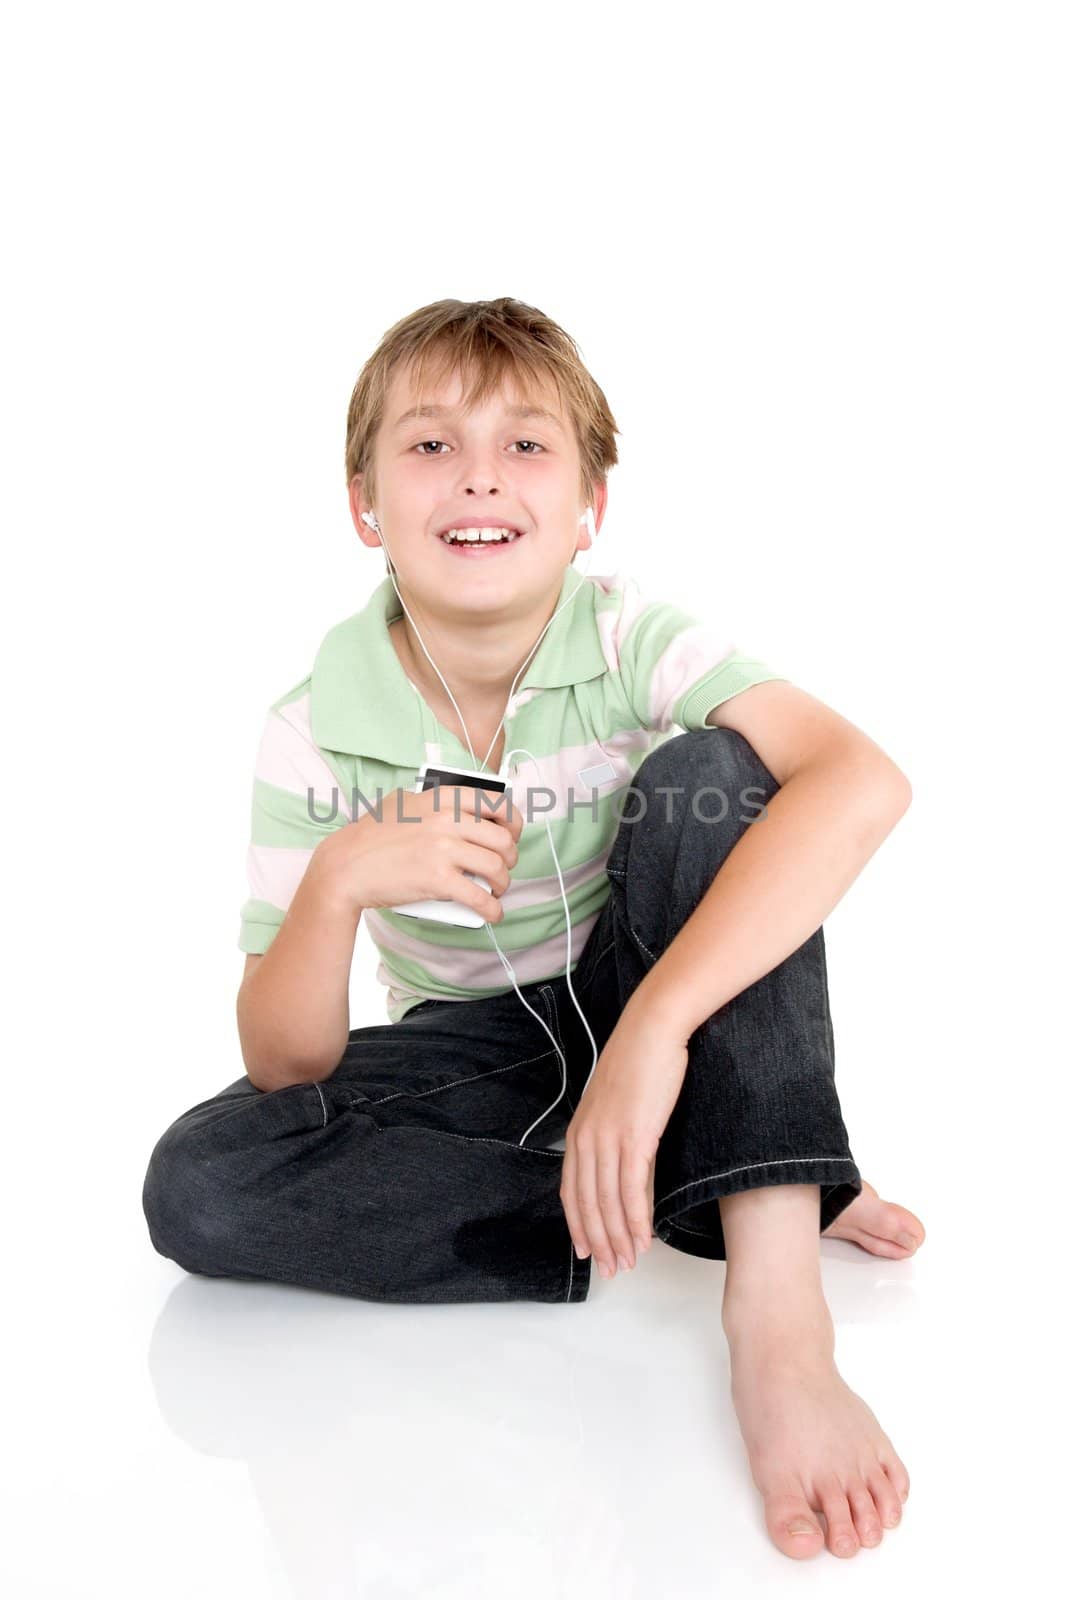 Casual boy sitting with portable music player by lovleah